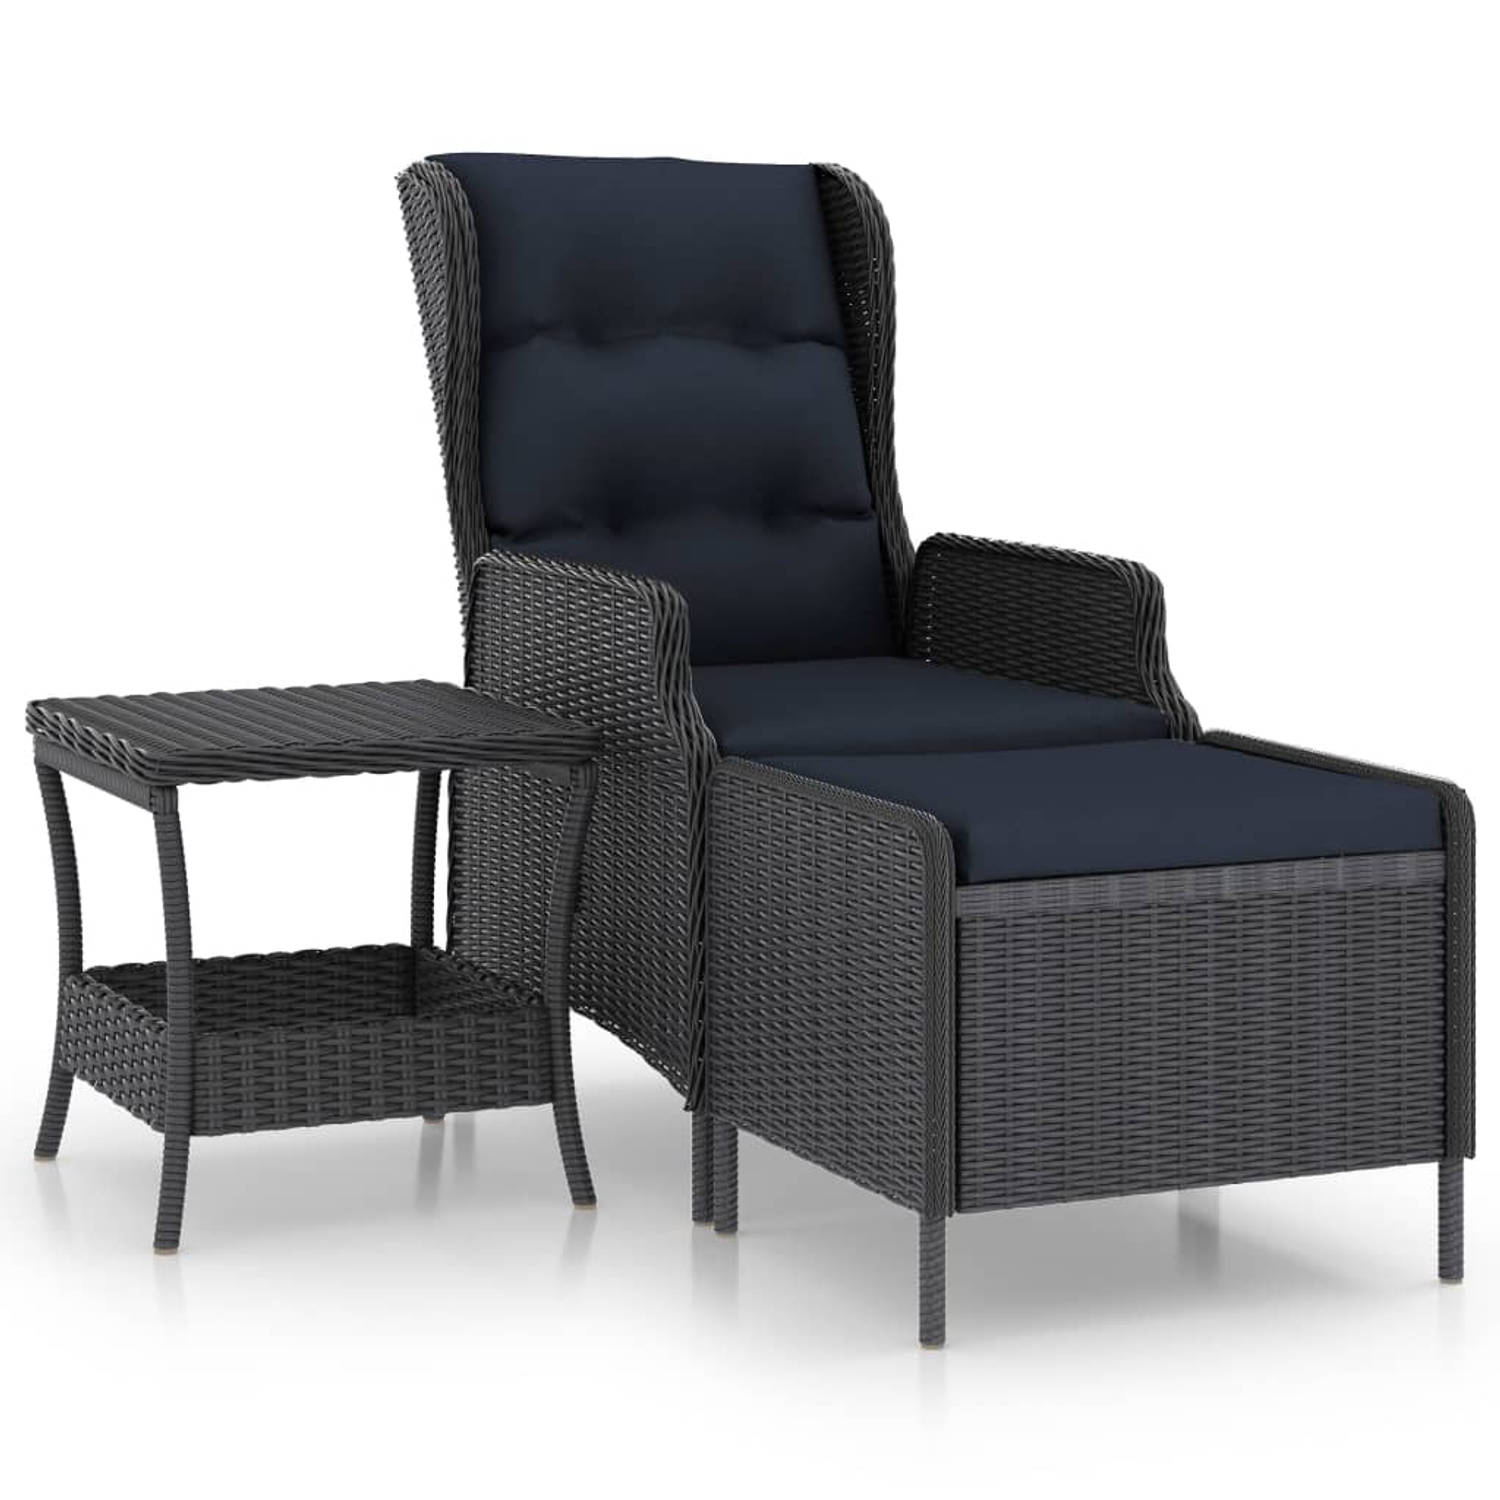 The Living Store 2-delige Loungeset met kussens poly rattan donkergrijs - Tuinset